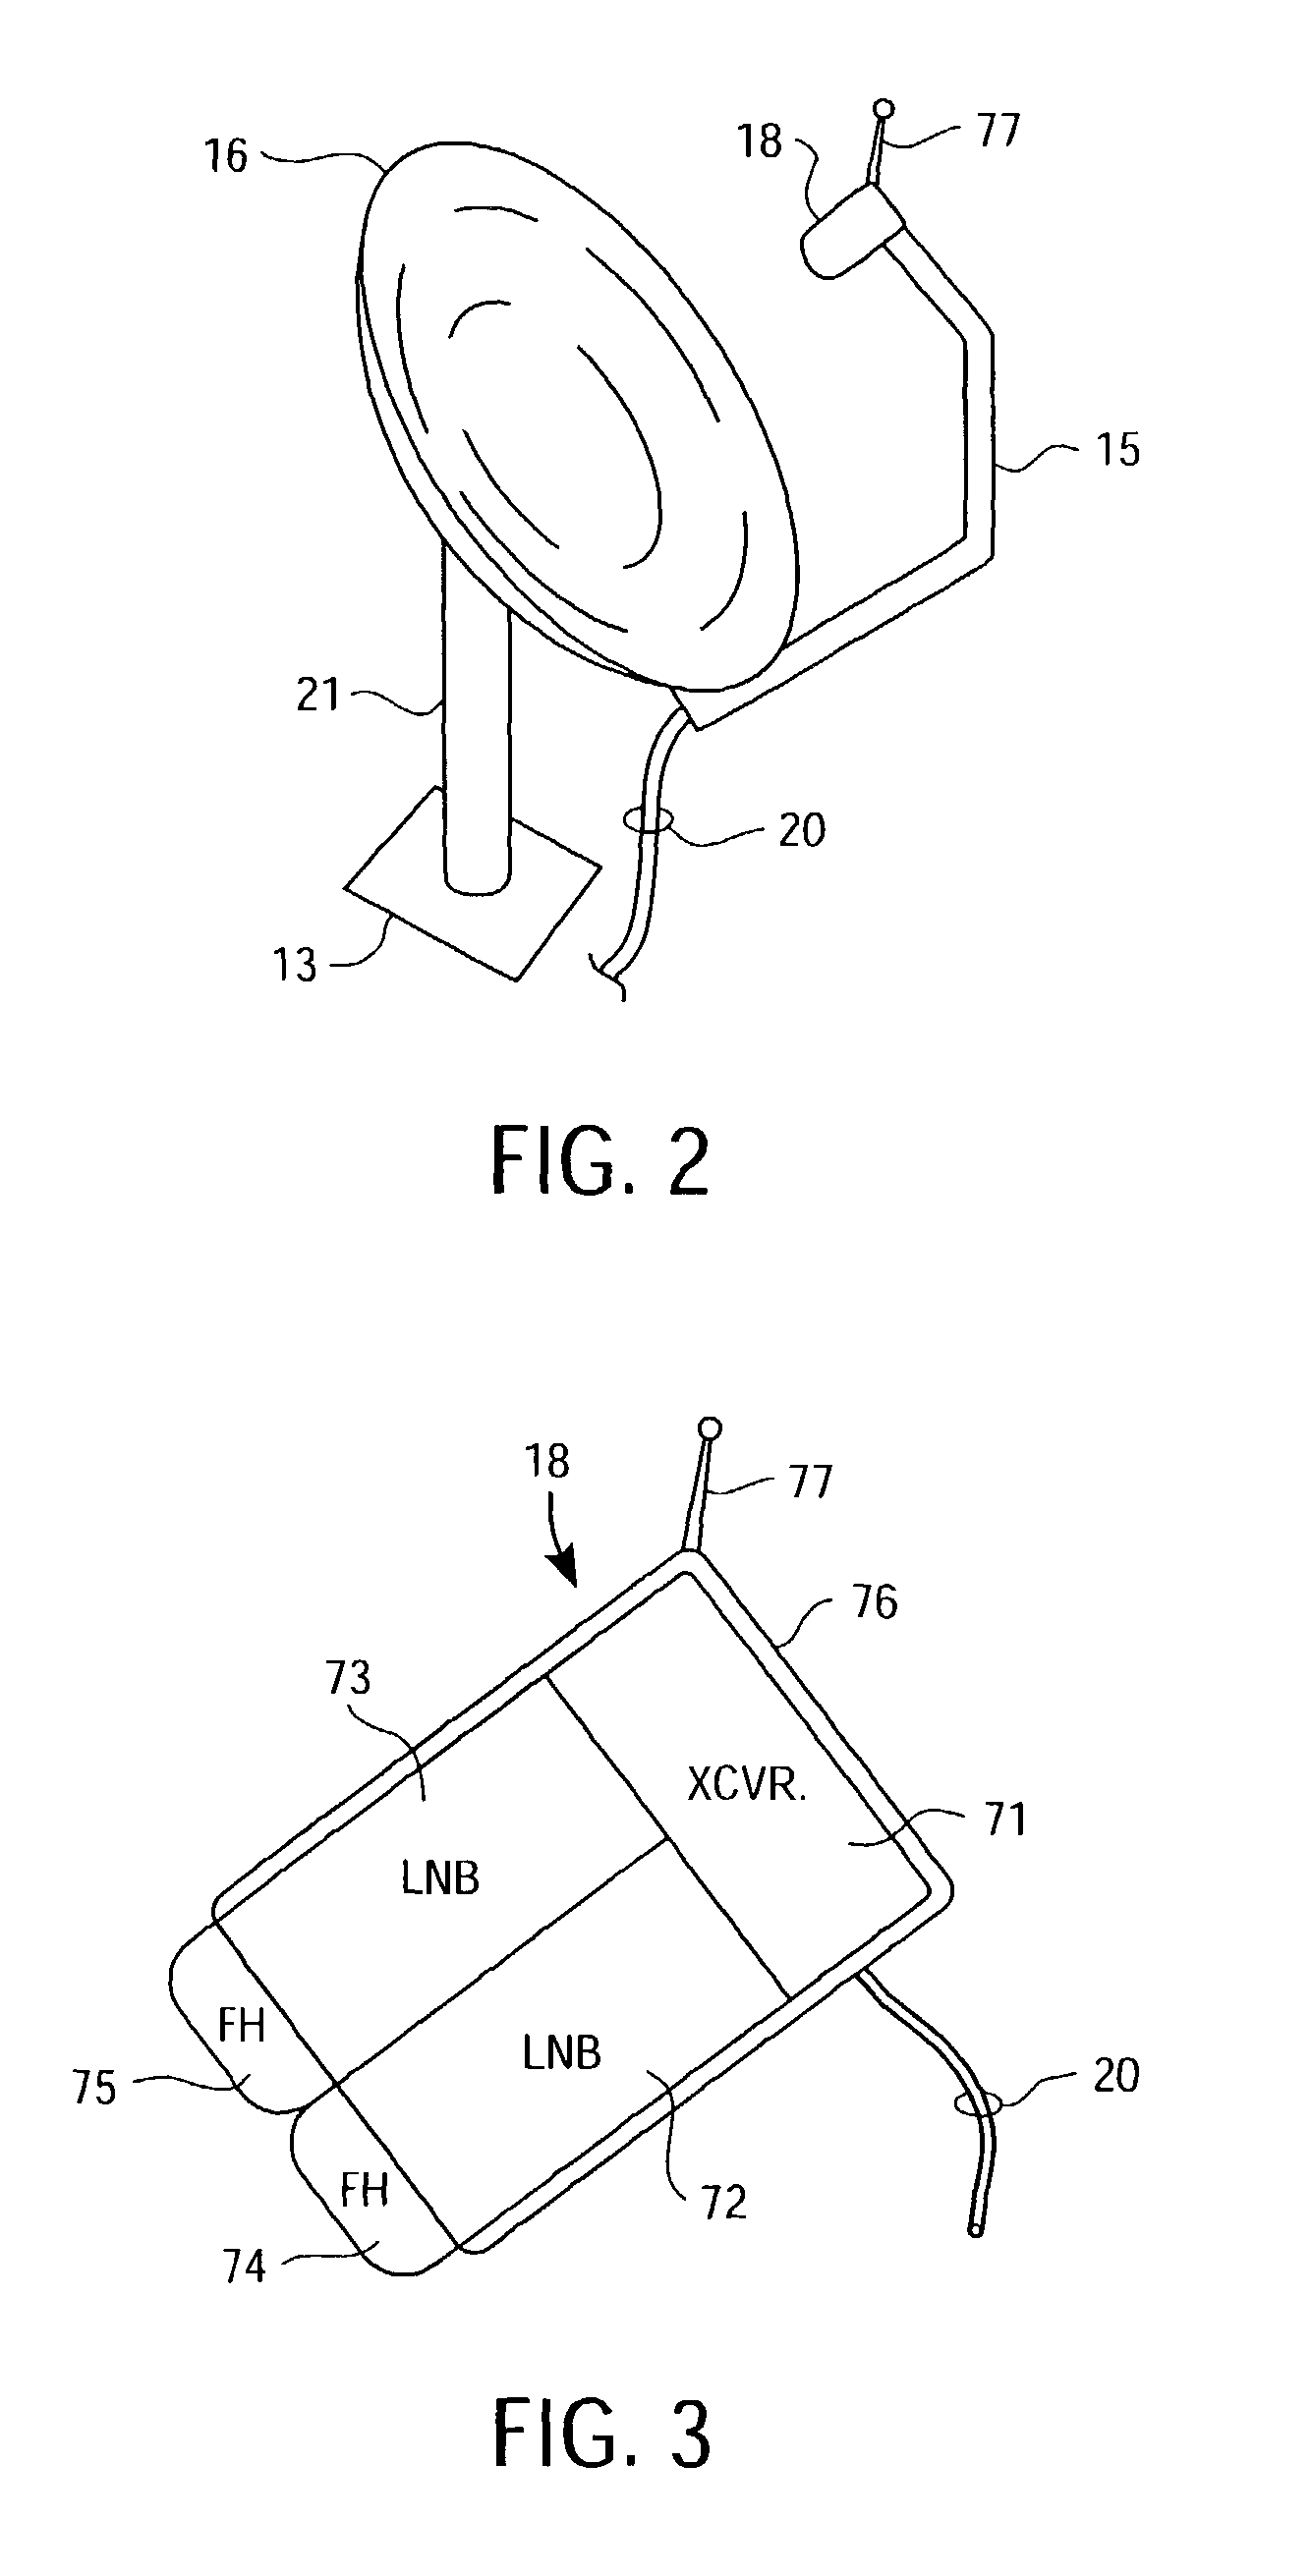 Apparatus and method for wireless video gaming